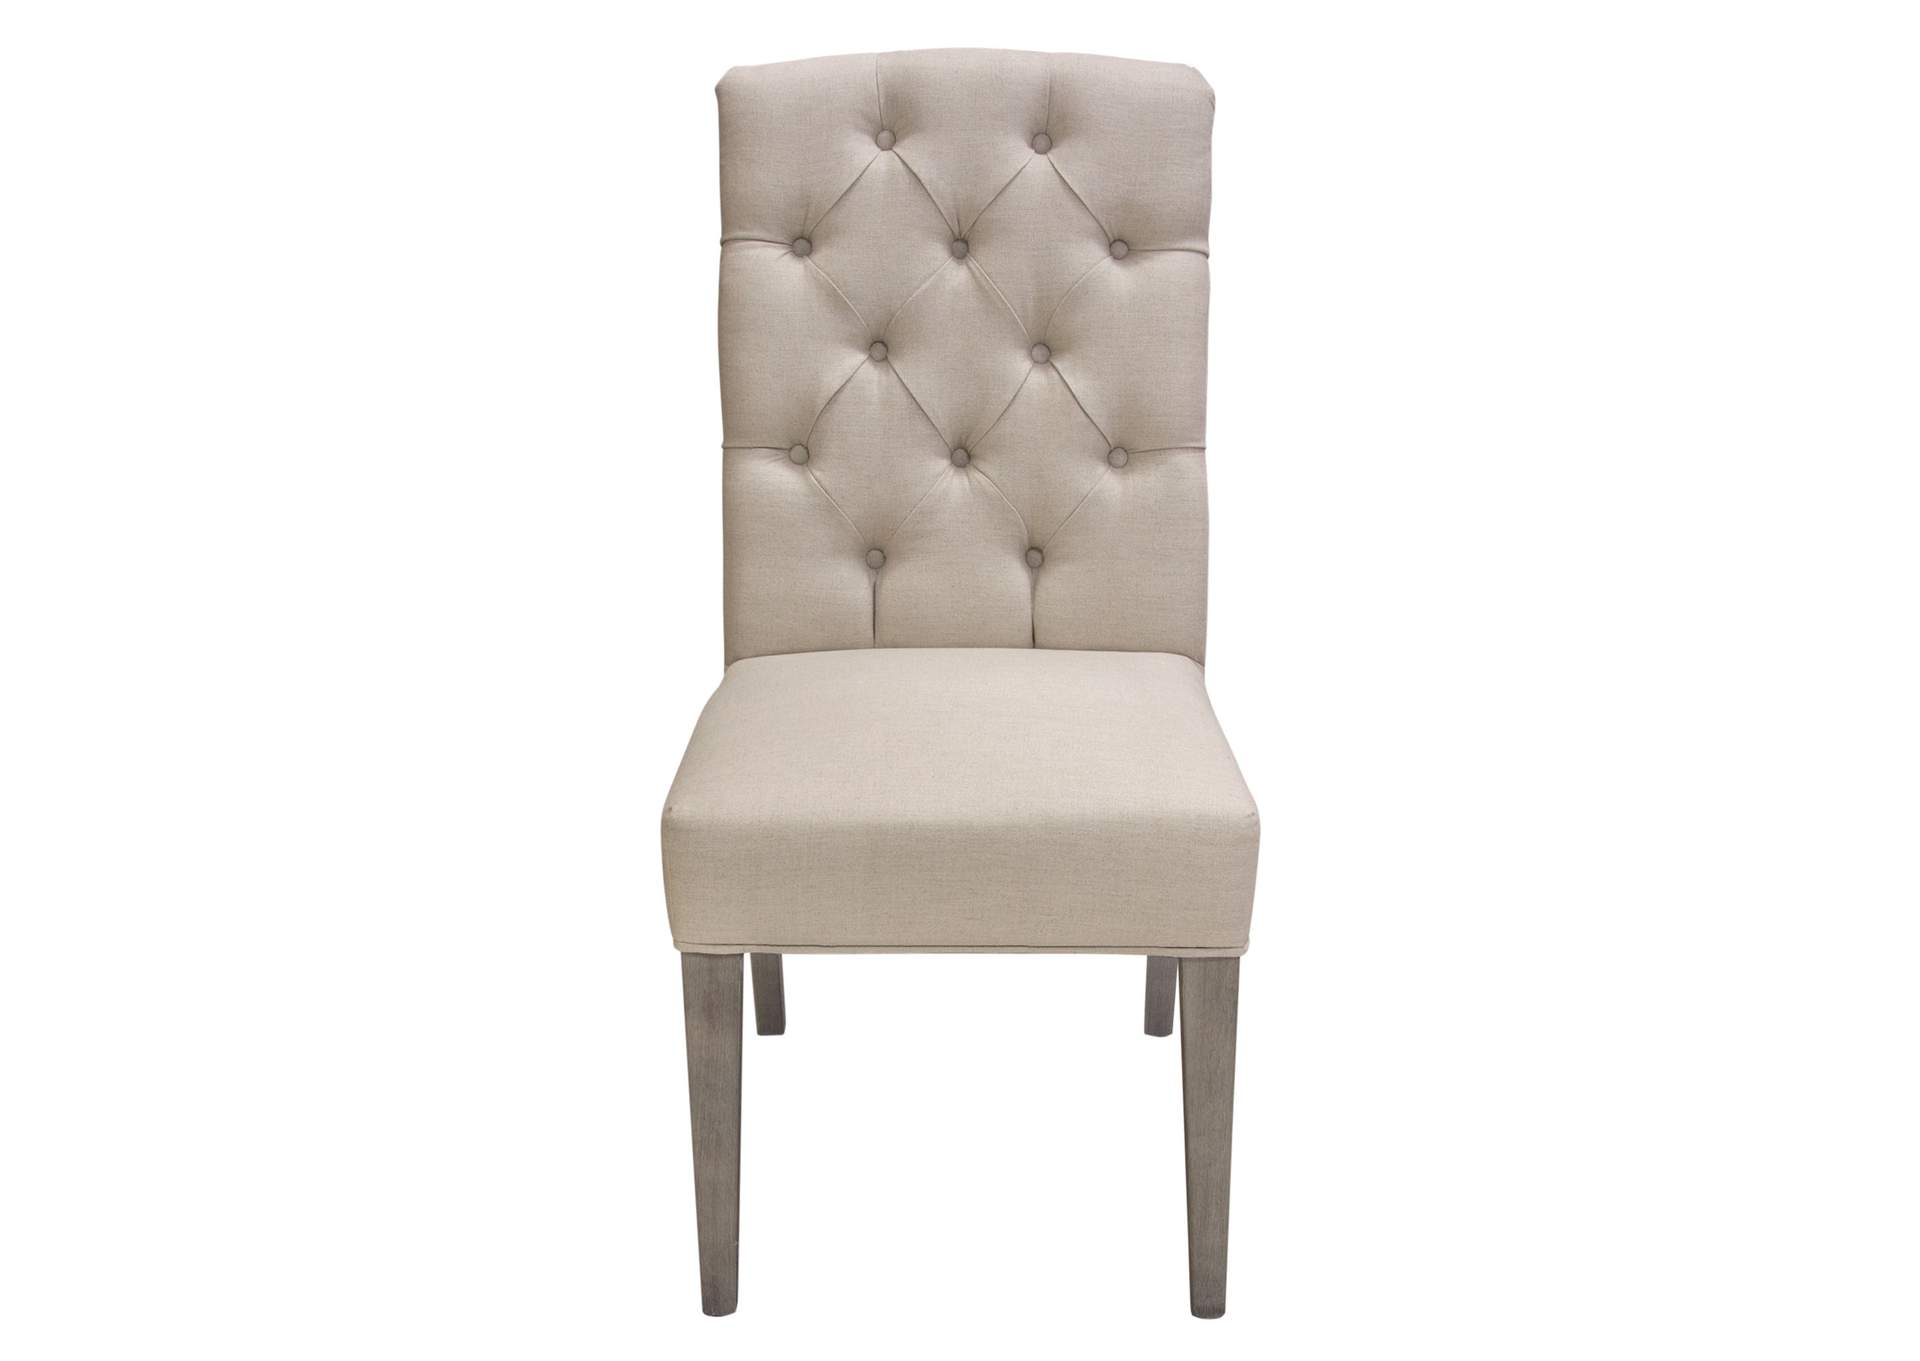 Set of Two Napa Tufted Dining Side Chairs in Sand Linen Fabric with Wood Legs in Grey Oak Finish by Diamond Sofa,Diamond Sofa